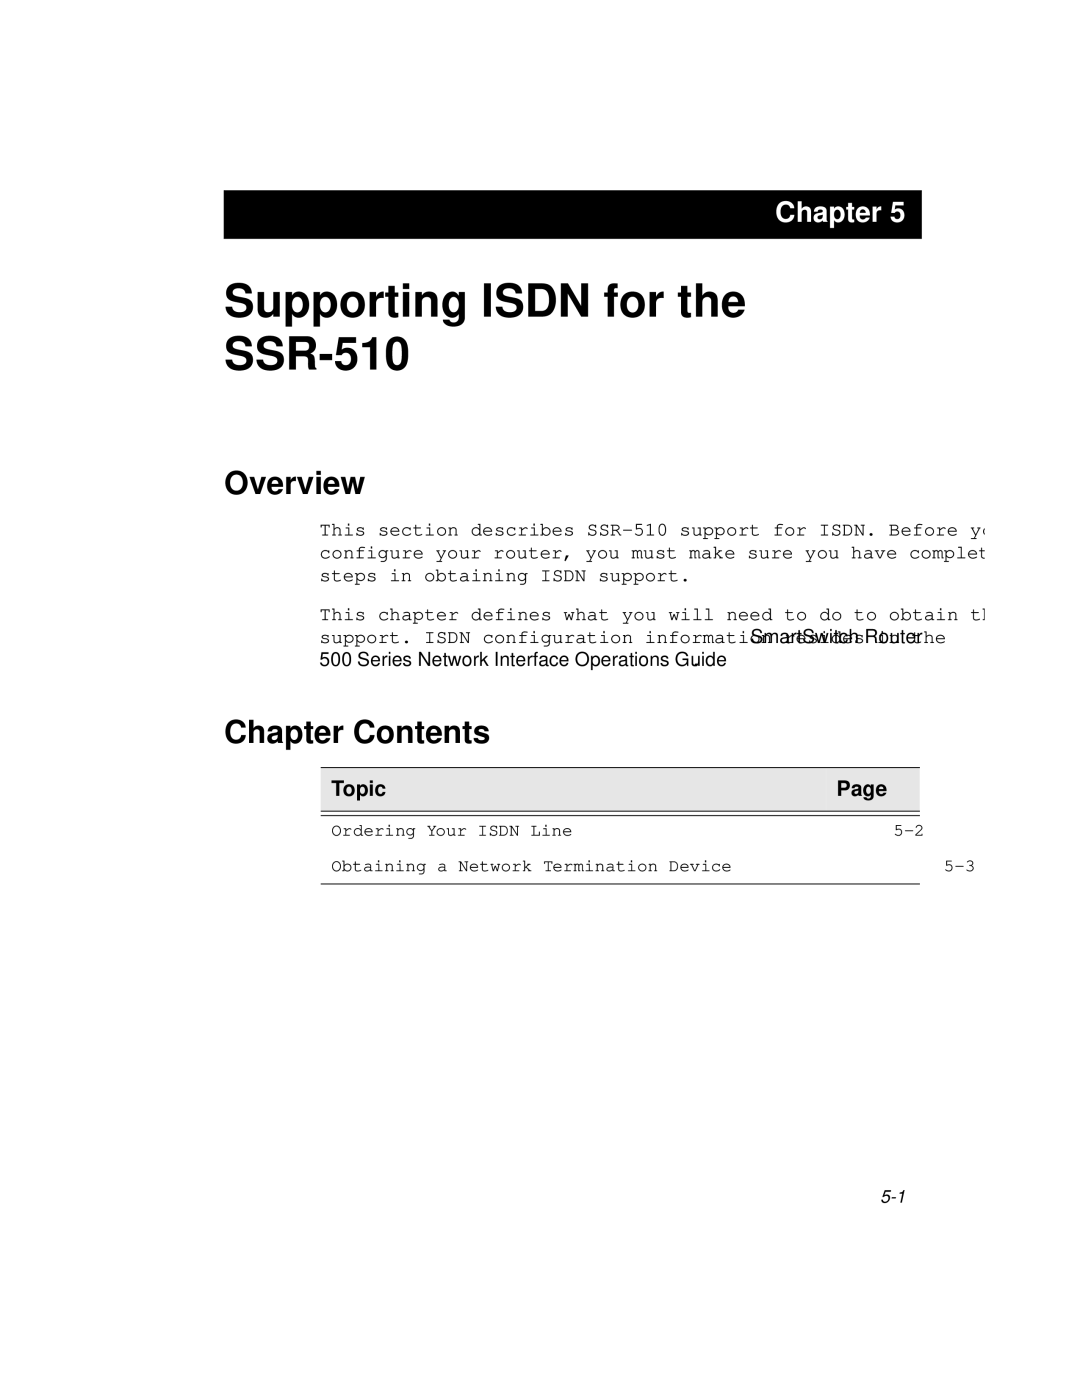 Cabletron Systems 520 manual Supporting Isdn for the SSR-510 